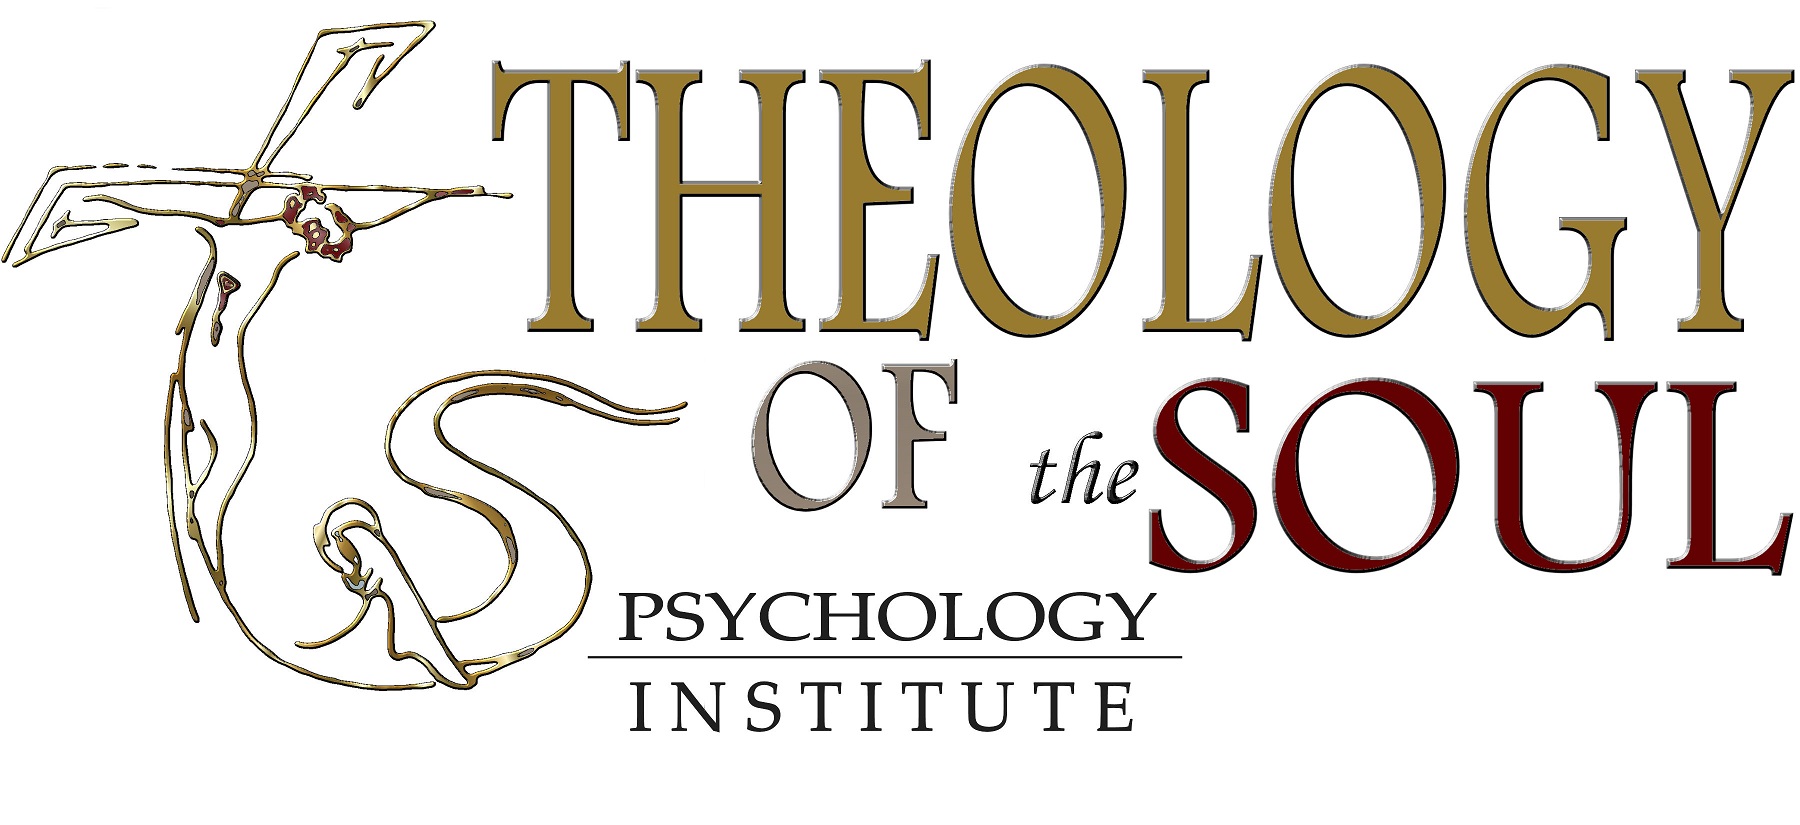 Theology Of the Soul